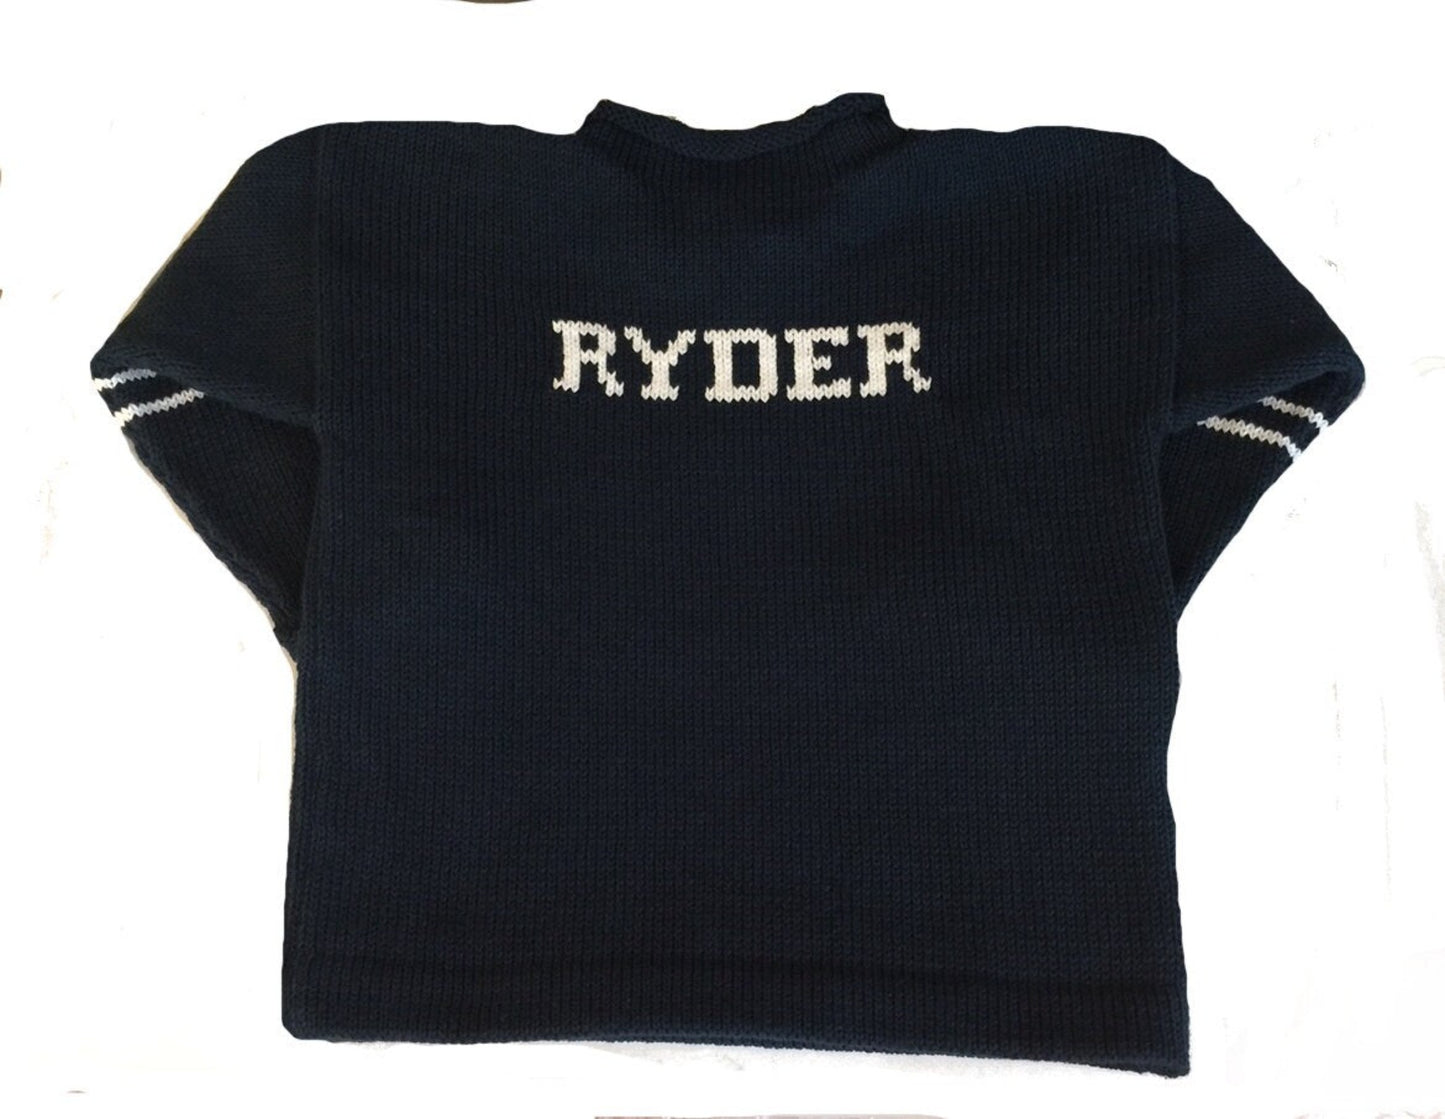 personalized Penn state sweater